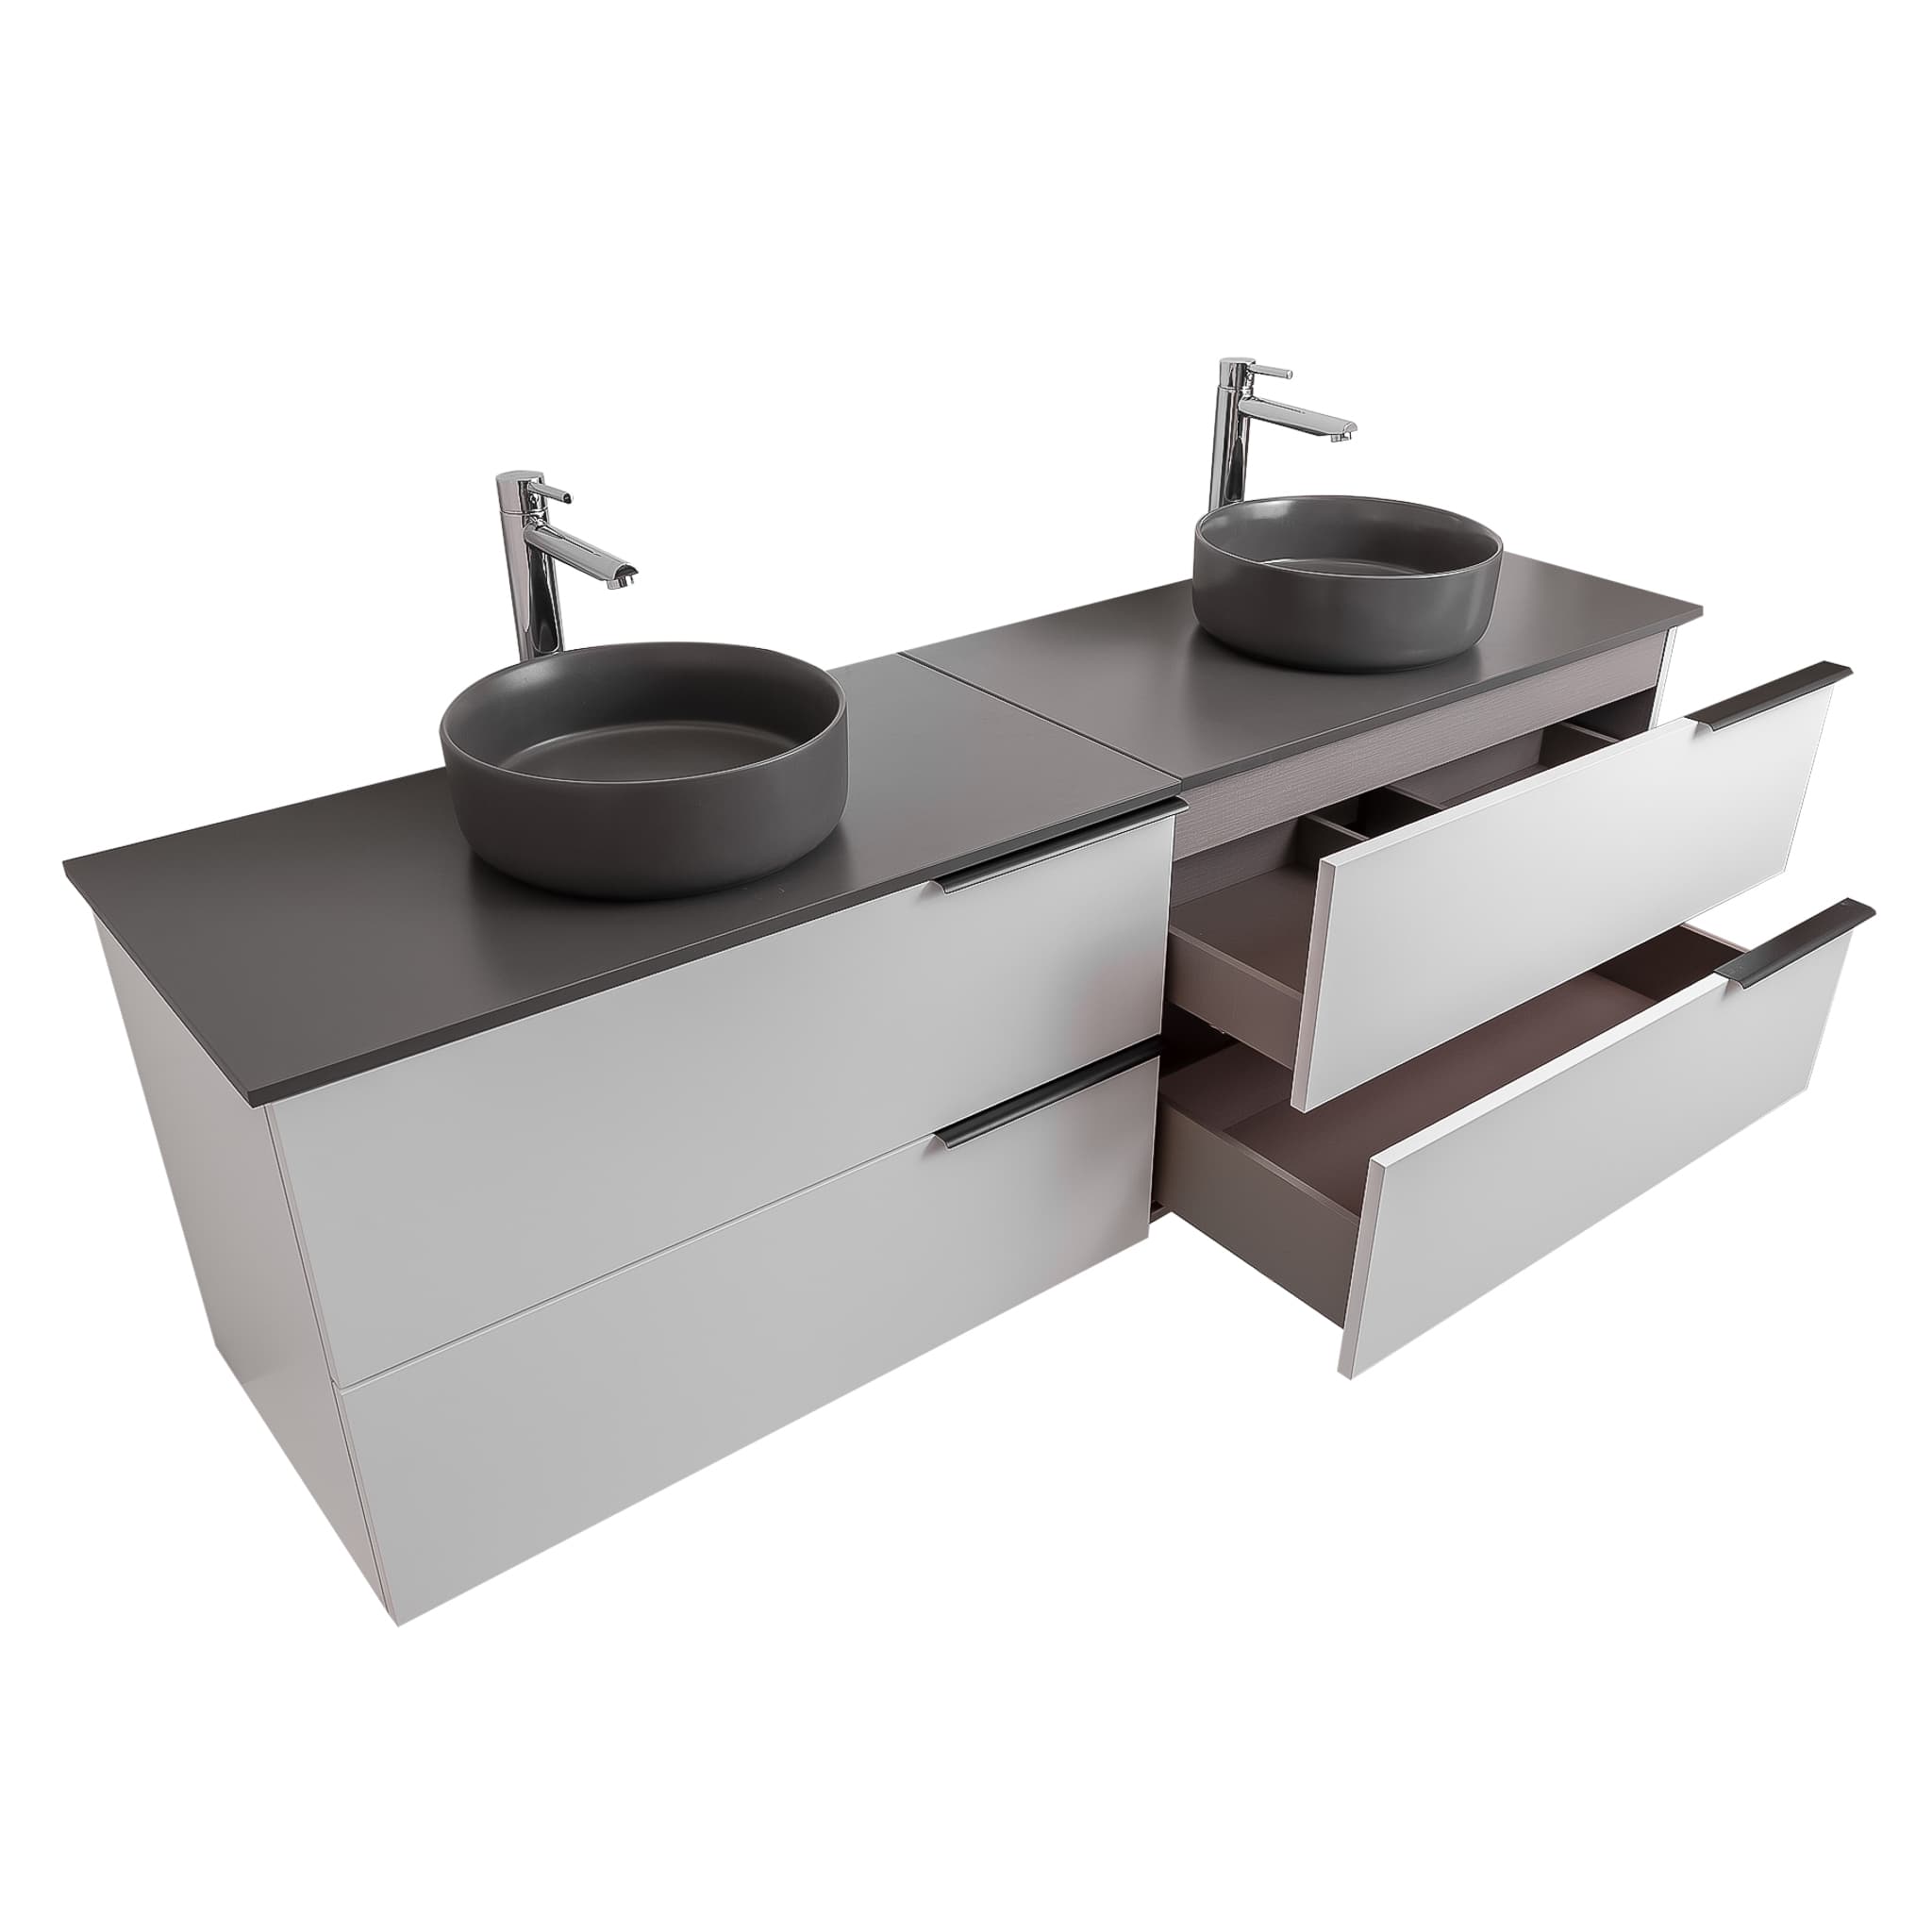 Mallorca 72 Matte White Cabinet, Ares Grey Ceniza Top And Two Ares Grey Ceniza Ceramic Basin, Wall Mounted Modern Vanity Set